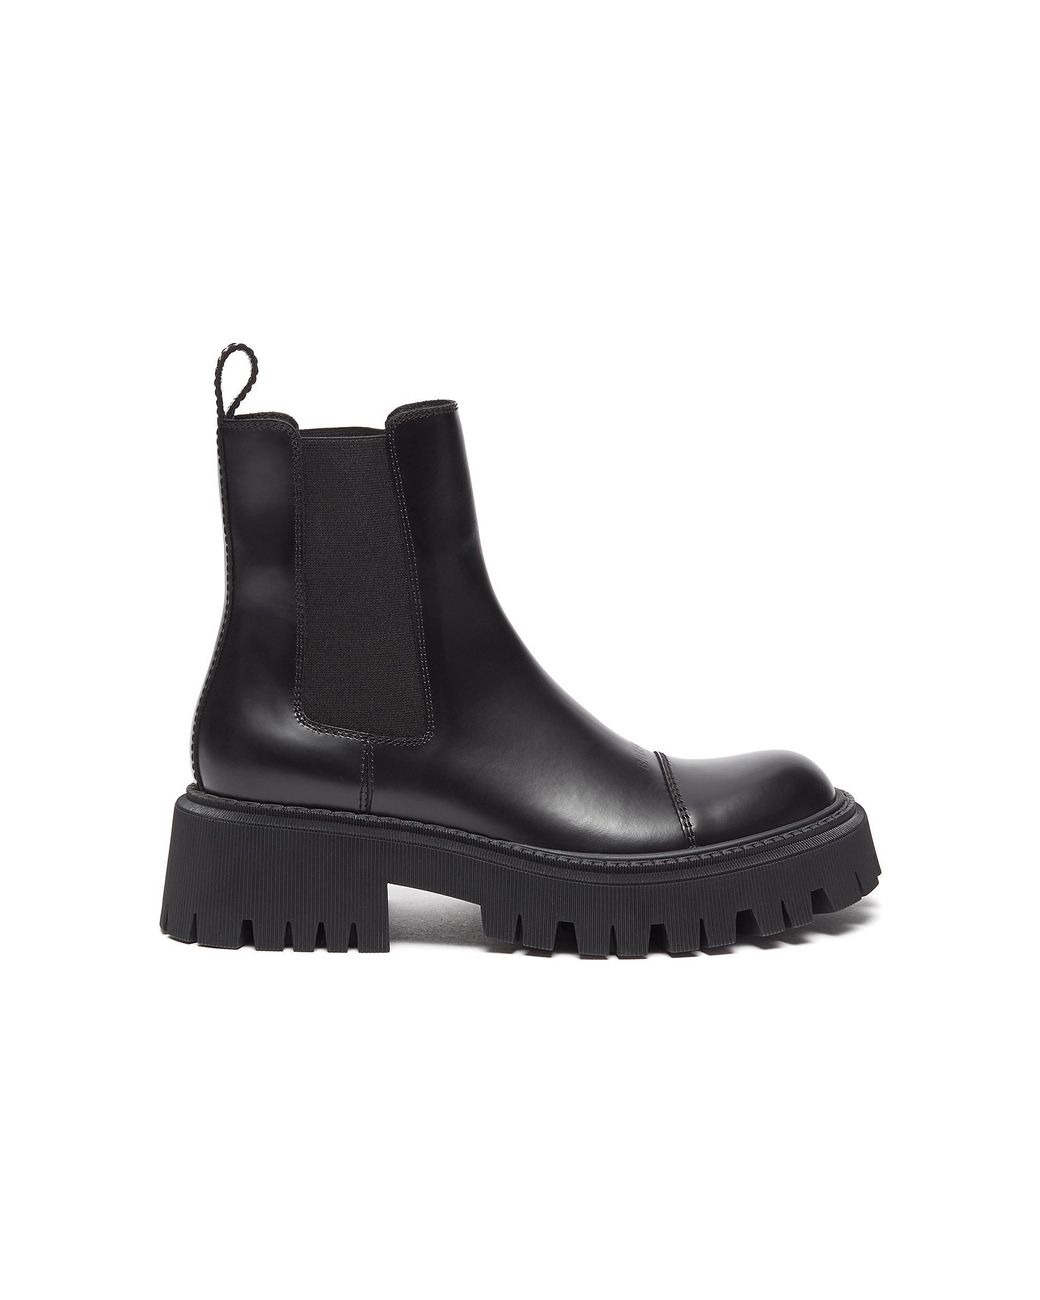 Balenciaga Tractor' Chunky Outsole Leather Chelsea Boots in Black - Lyst